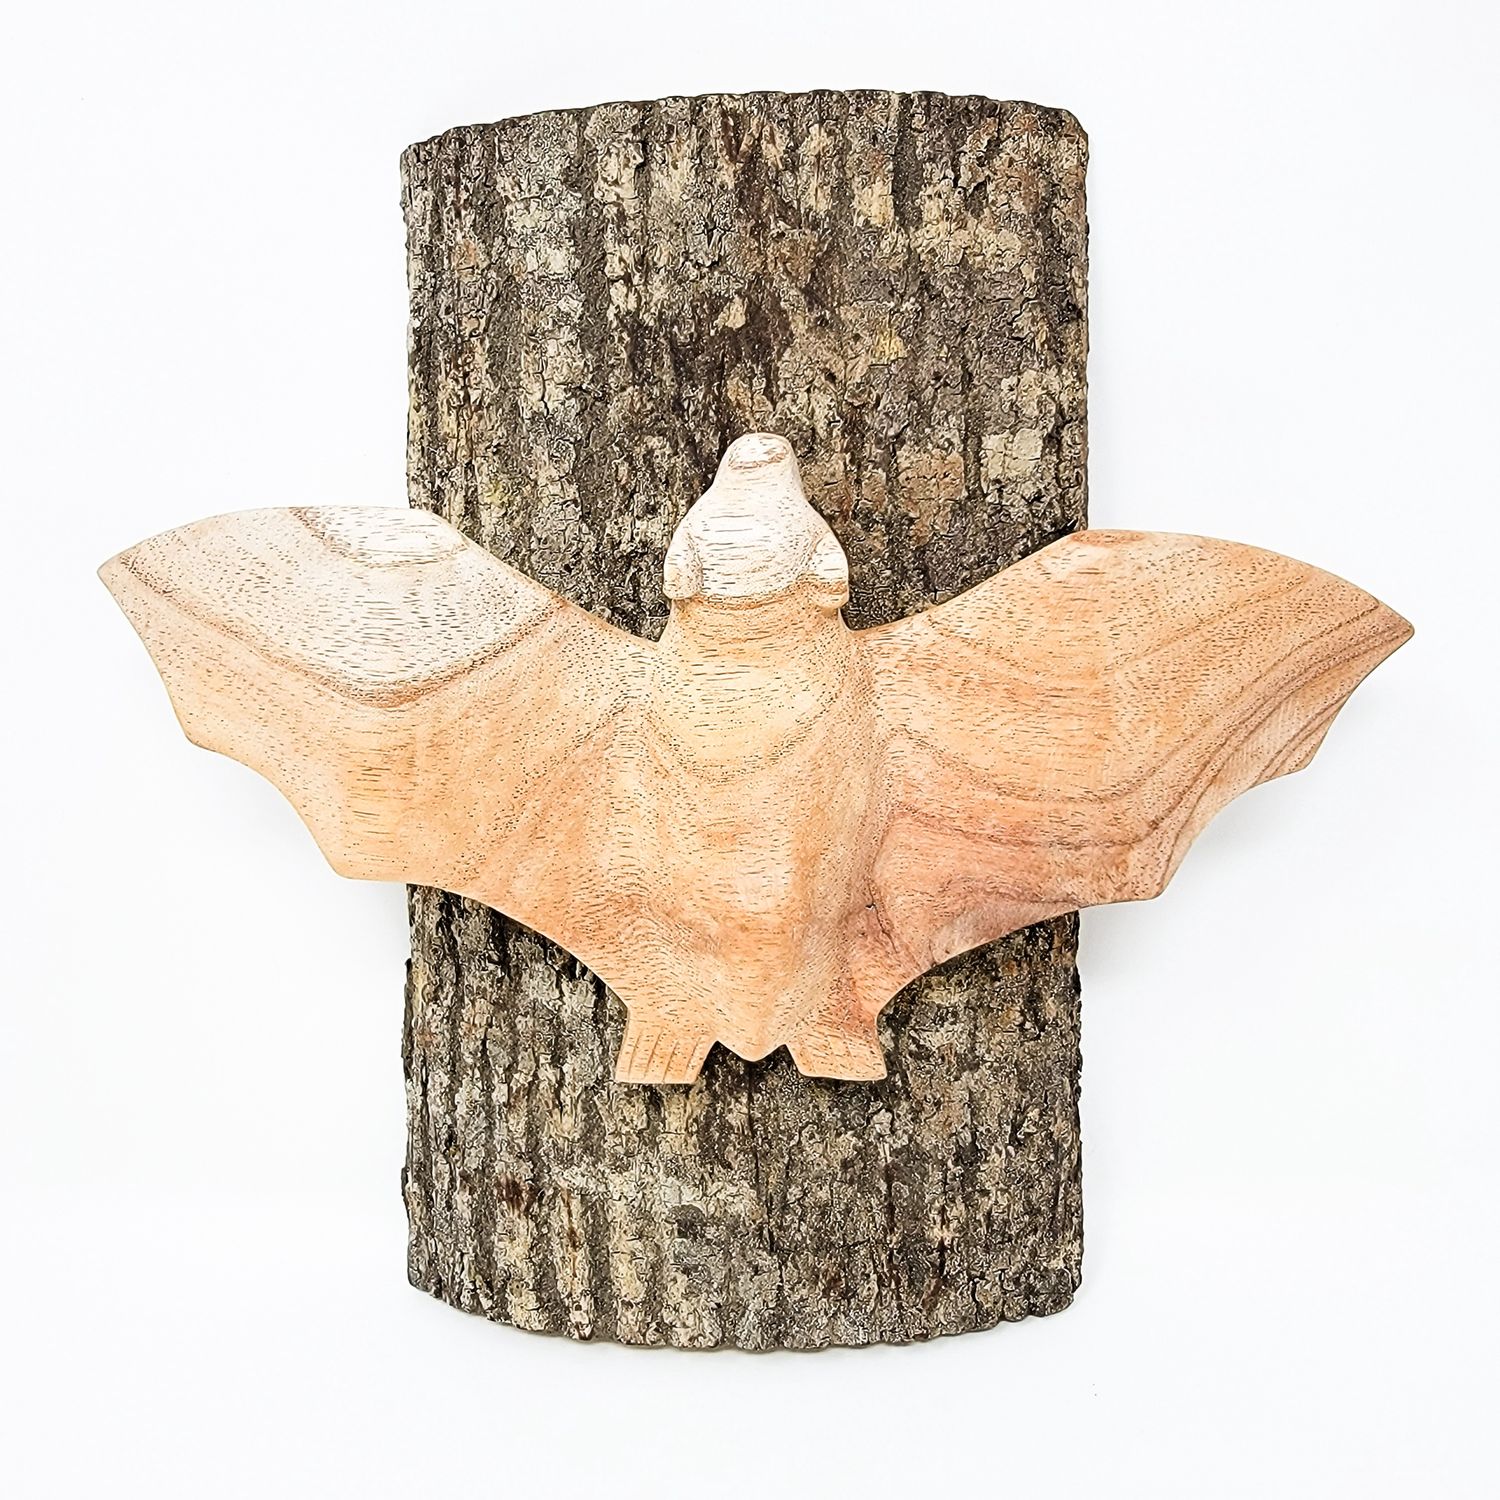 BAT STATUE ON LOG WITH WINGS OUT 2290, Item #: 2290, Alternate Lookup: CKB4-183, Vendor Stock #: TIN 027 10in 26cm